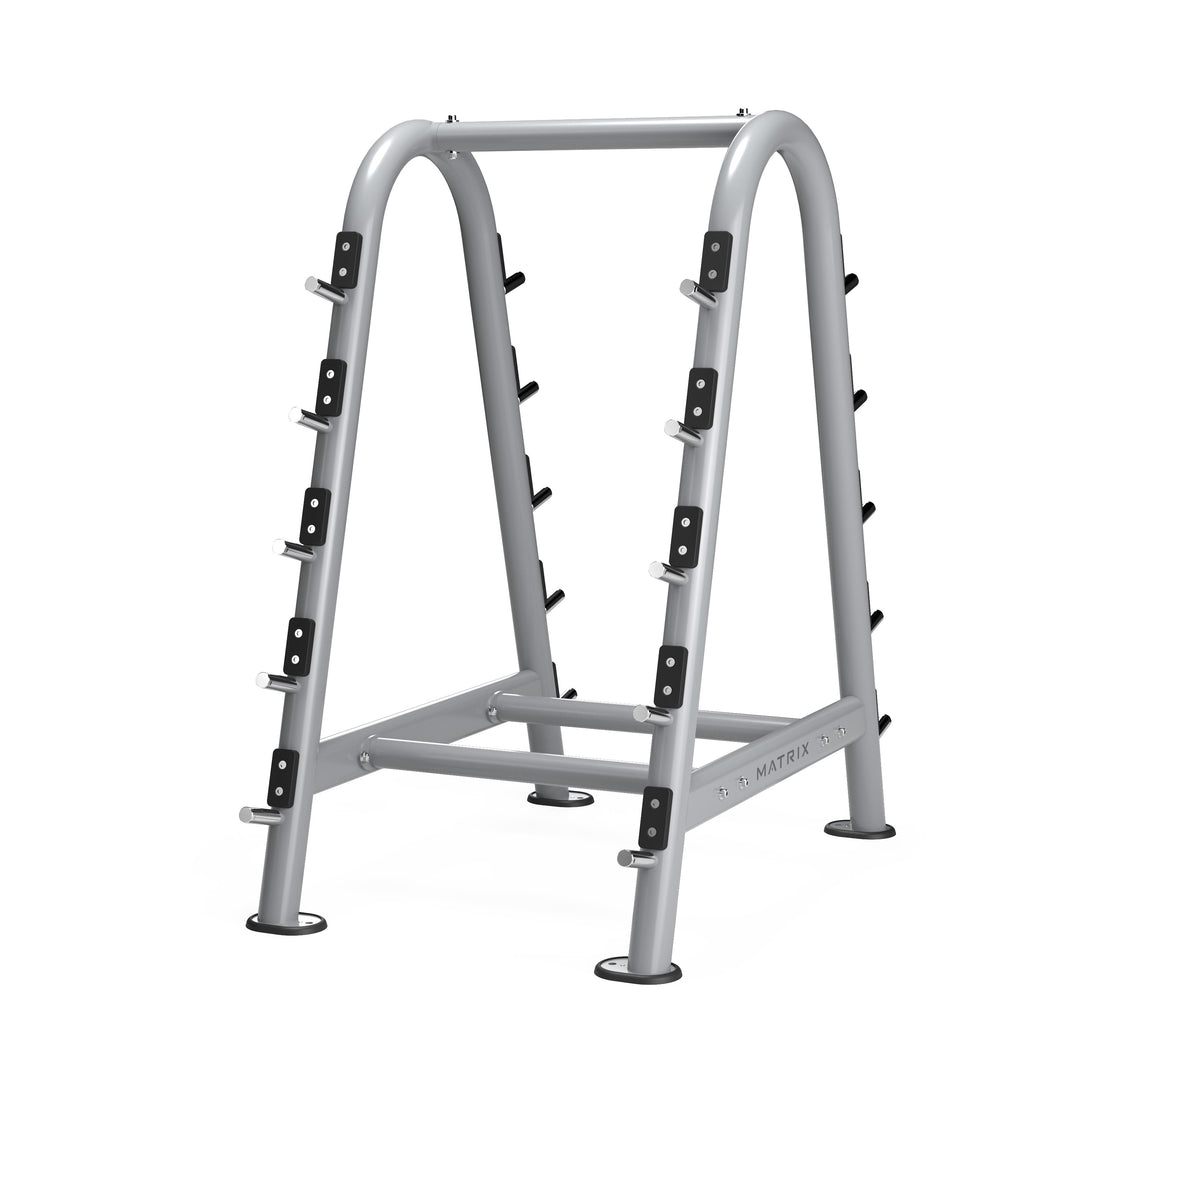 Matrix Fitness Magnum Barbell Rack full view | Fitness Experience